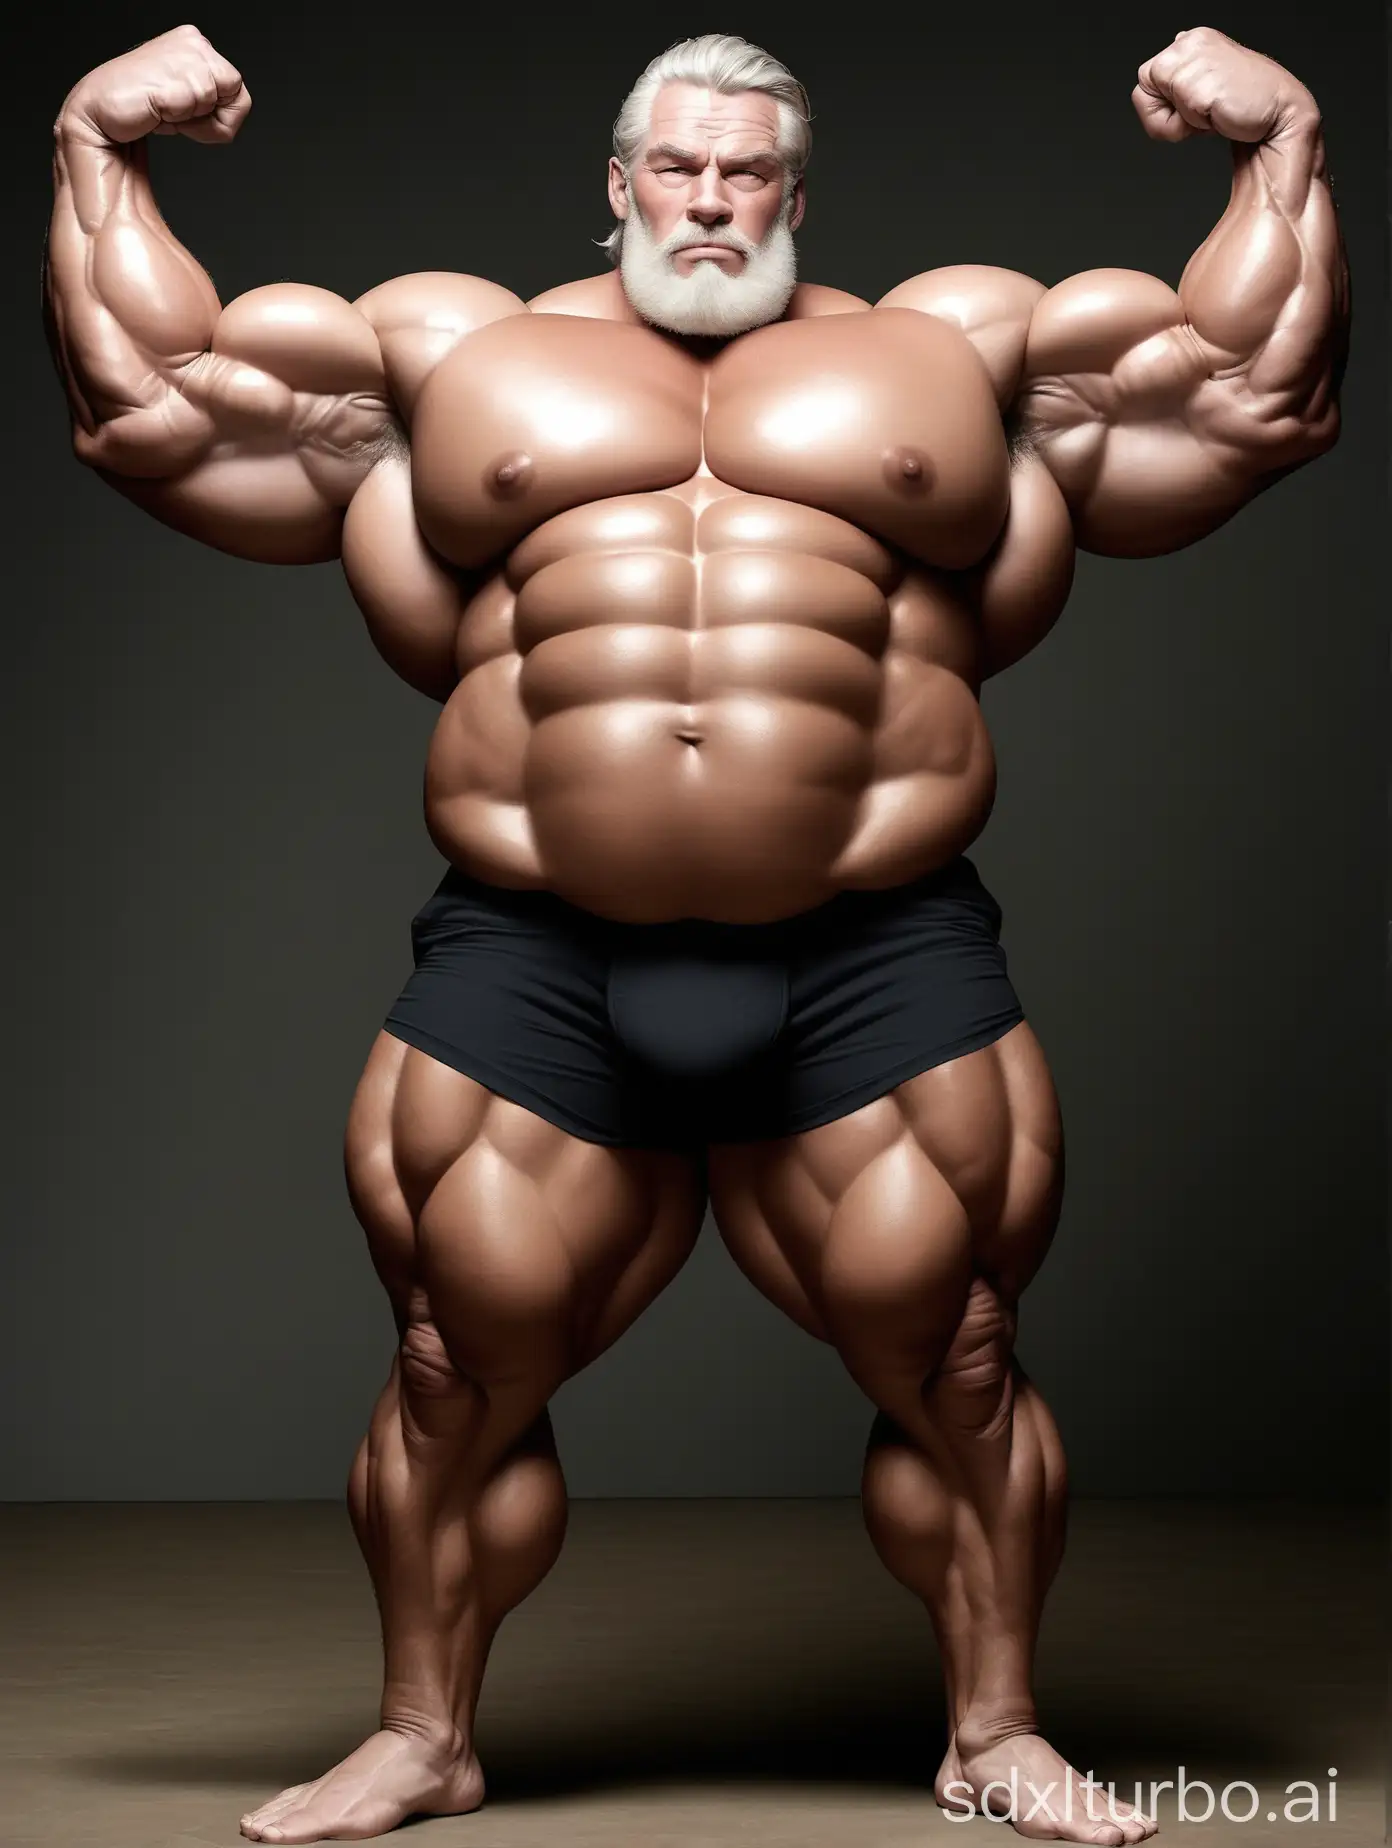 White skin and massive muscle stud, Huge and giant and Strong body, Very strong legs, 2m tall, very Big Chest, very Big biceps, very 8-pack abs, Very Massive muscle Body, Wearing underwear, he is very tall, very fat, Full Body, very long strong legs, raise his arms to show his huge biceps, very old man, very handsome men, long hair,